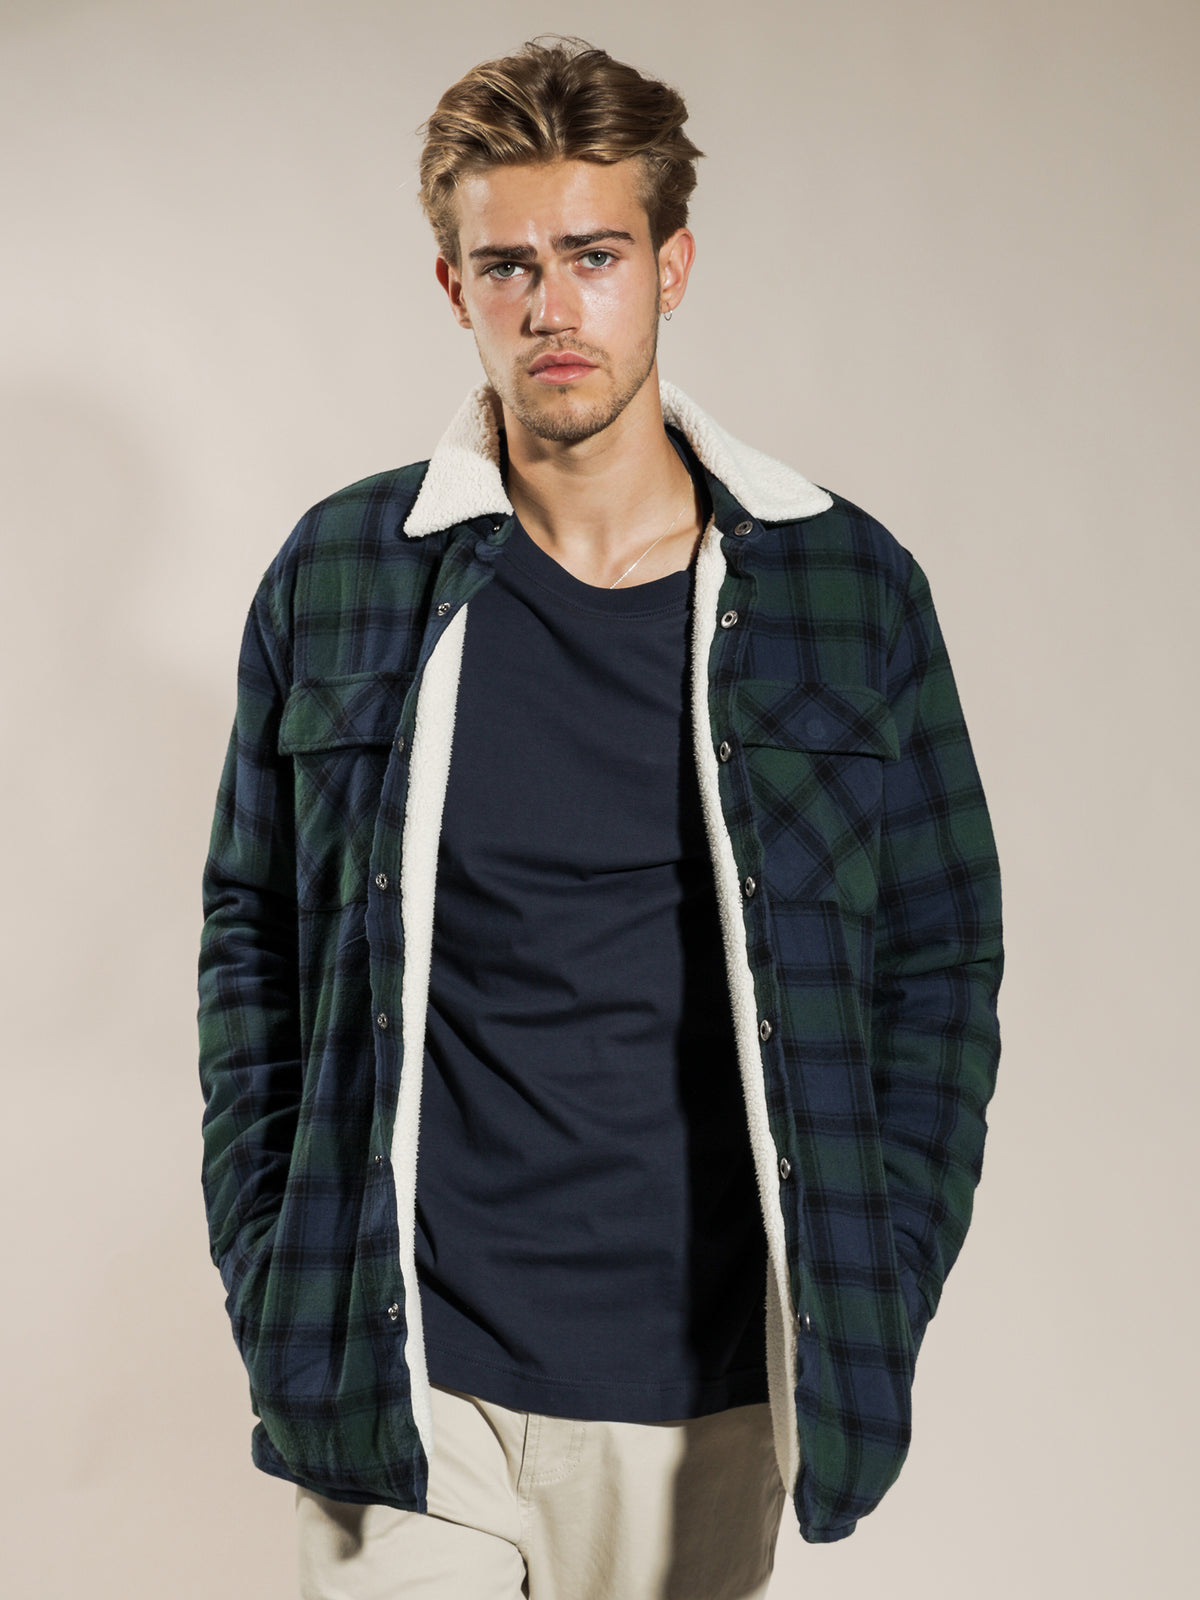 Micah Sherpa Jacket in Forest Plaid